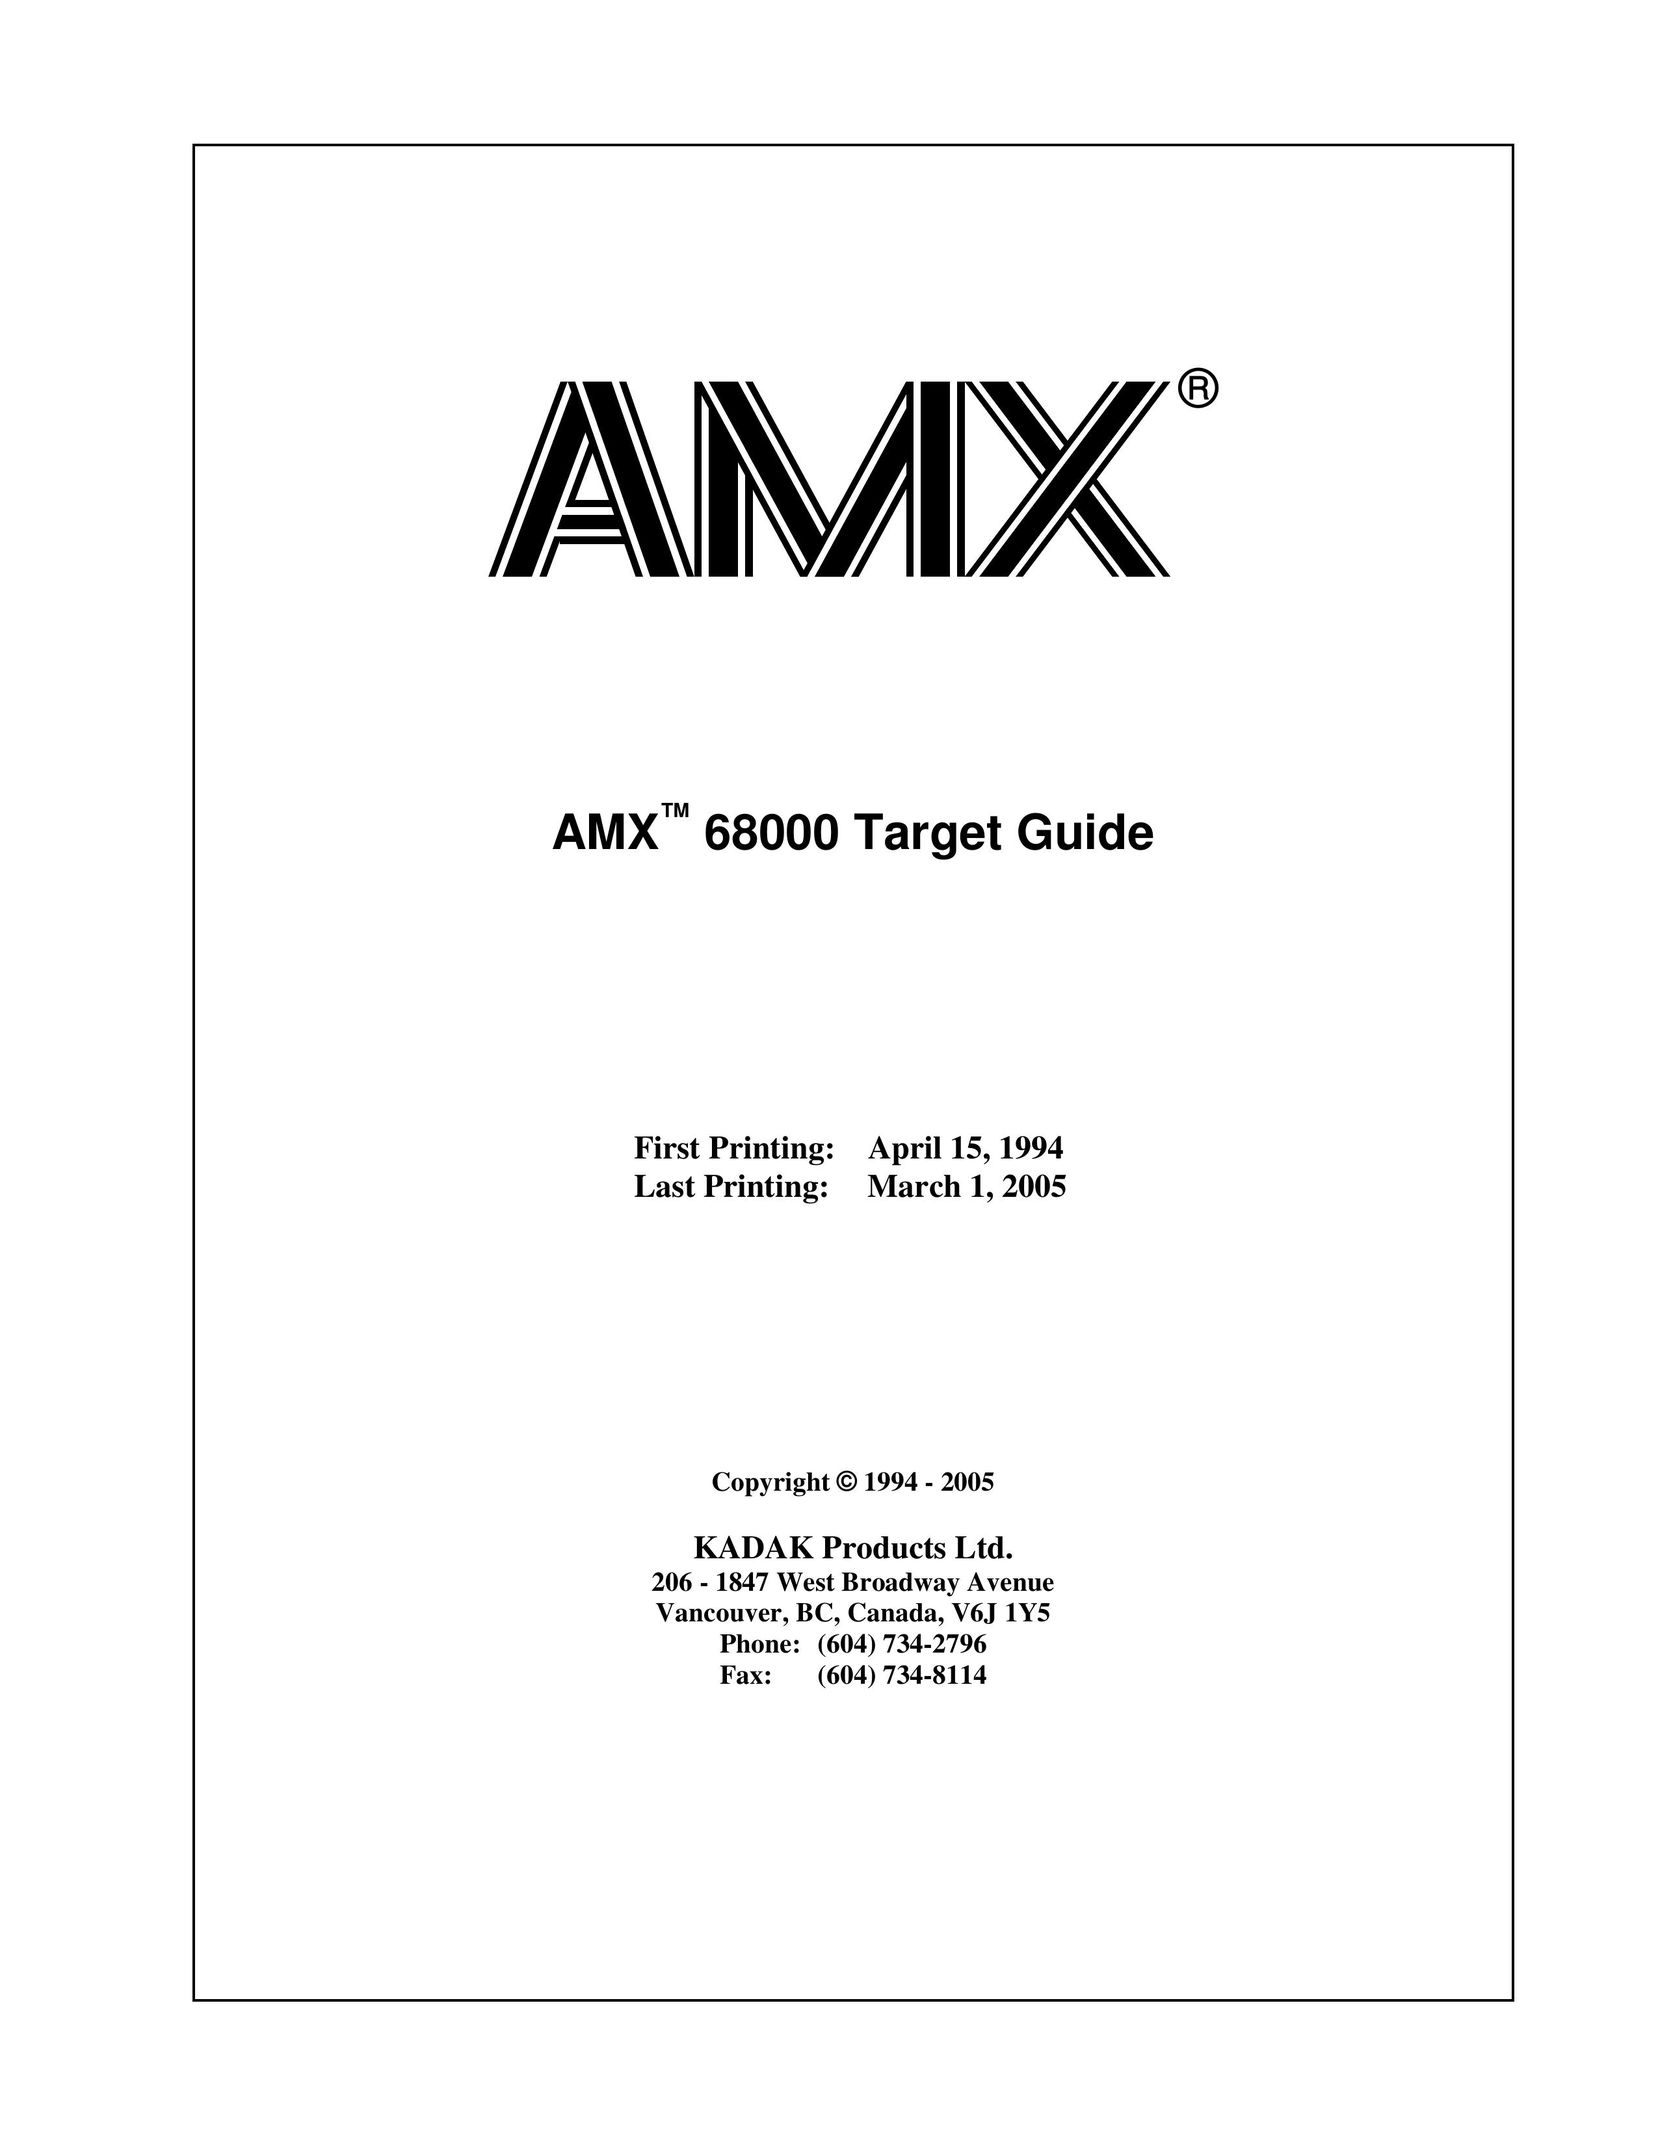 AMX Target Guide Computer Accessories User Manual